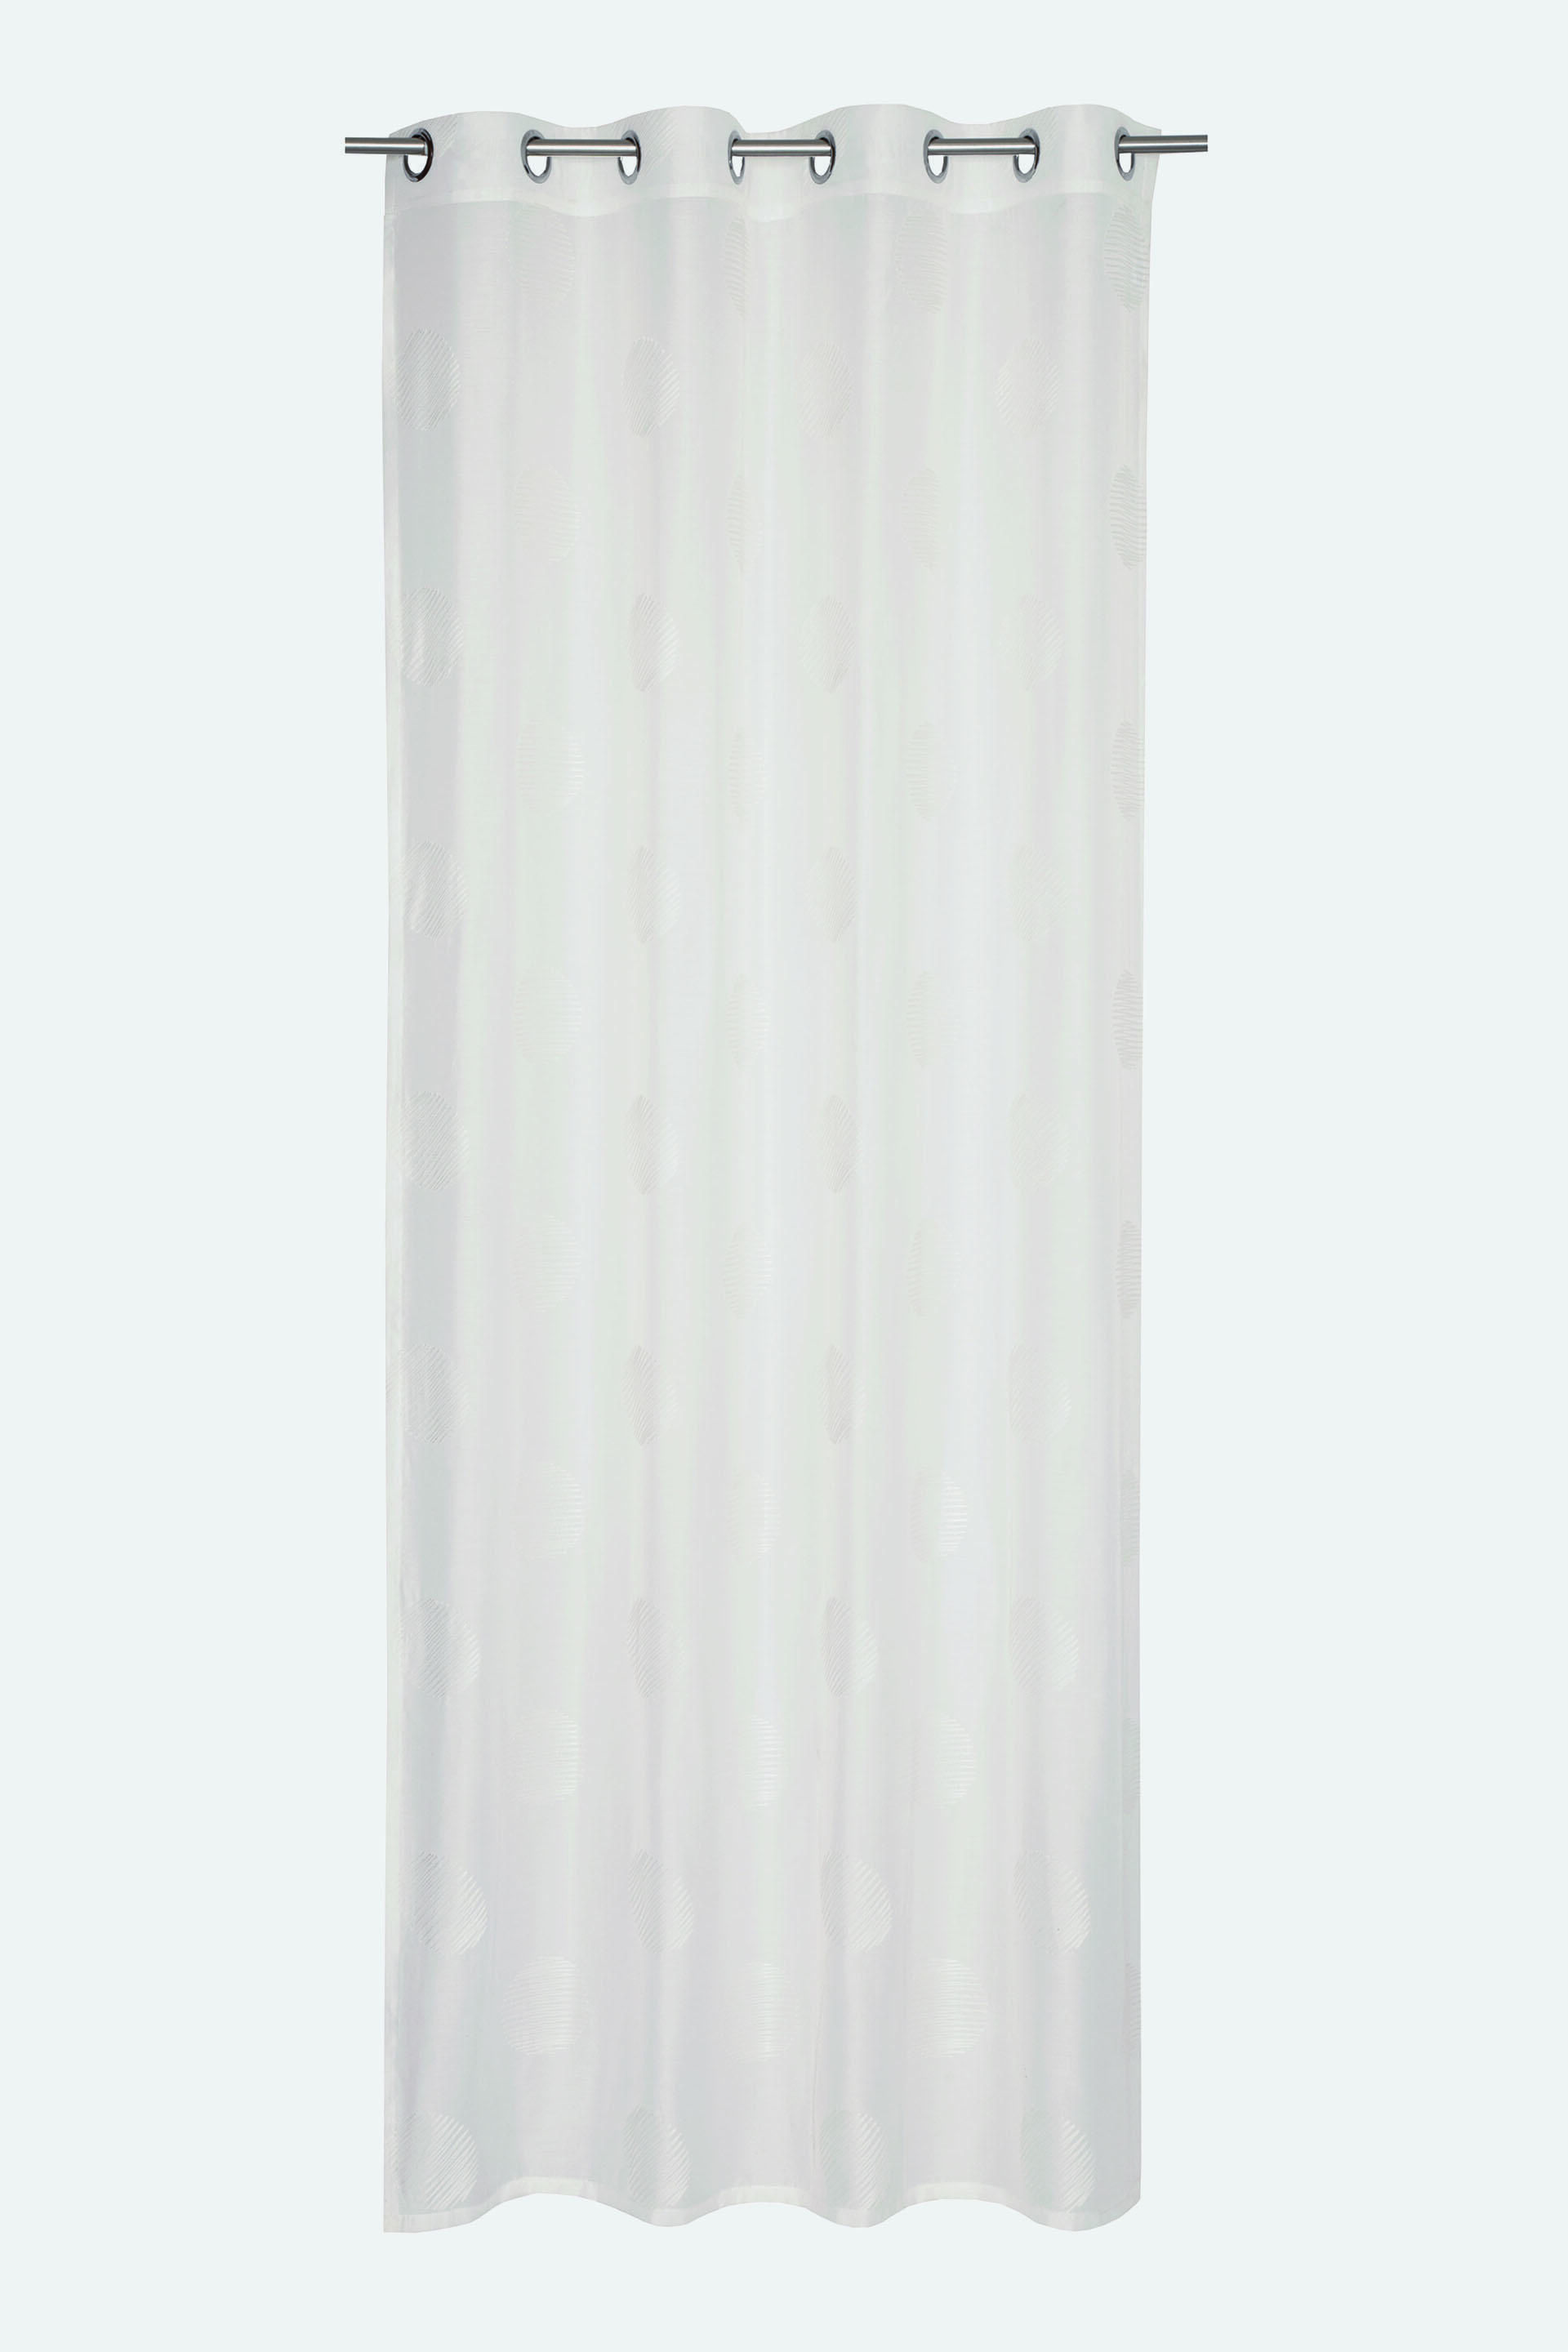 Esprit embroidery Sheer curtain eyelet with